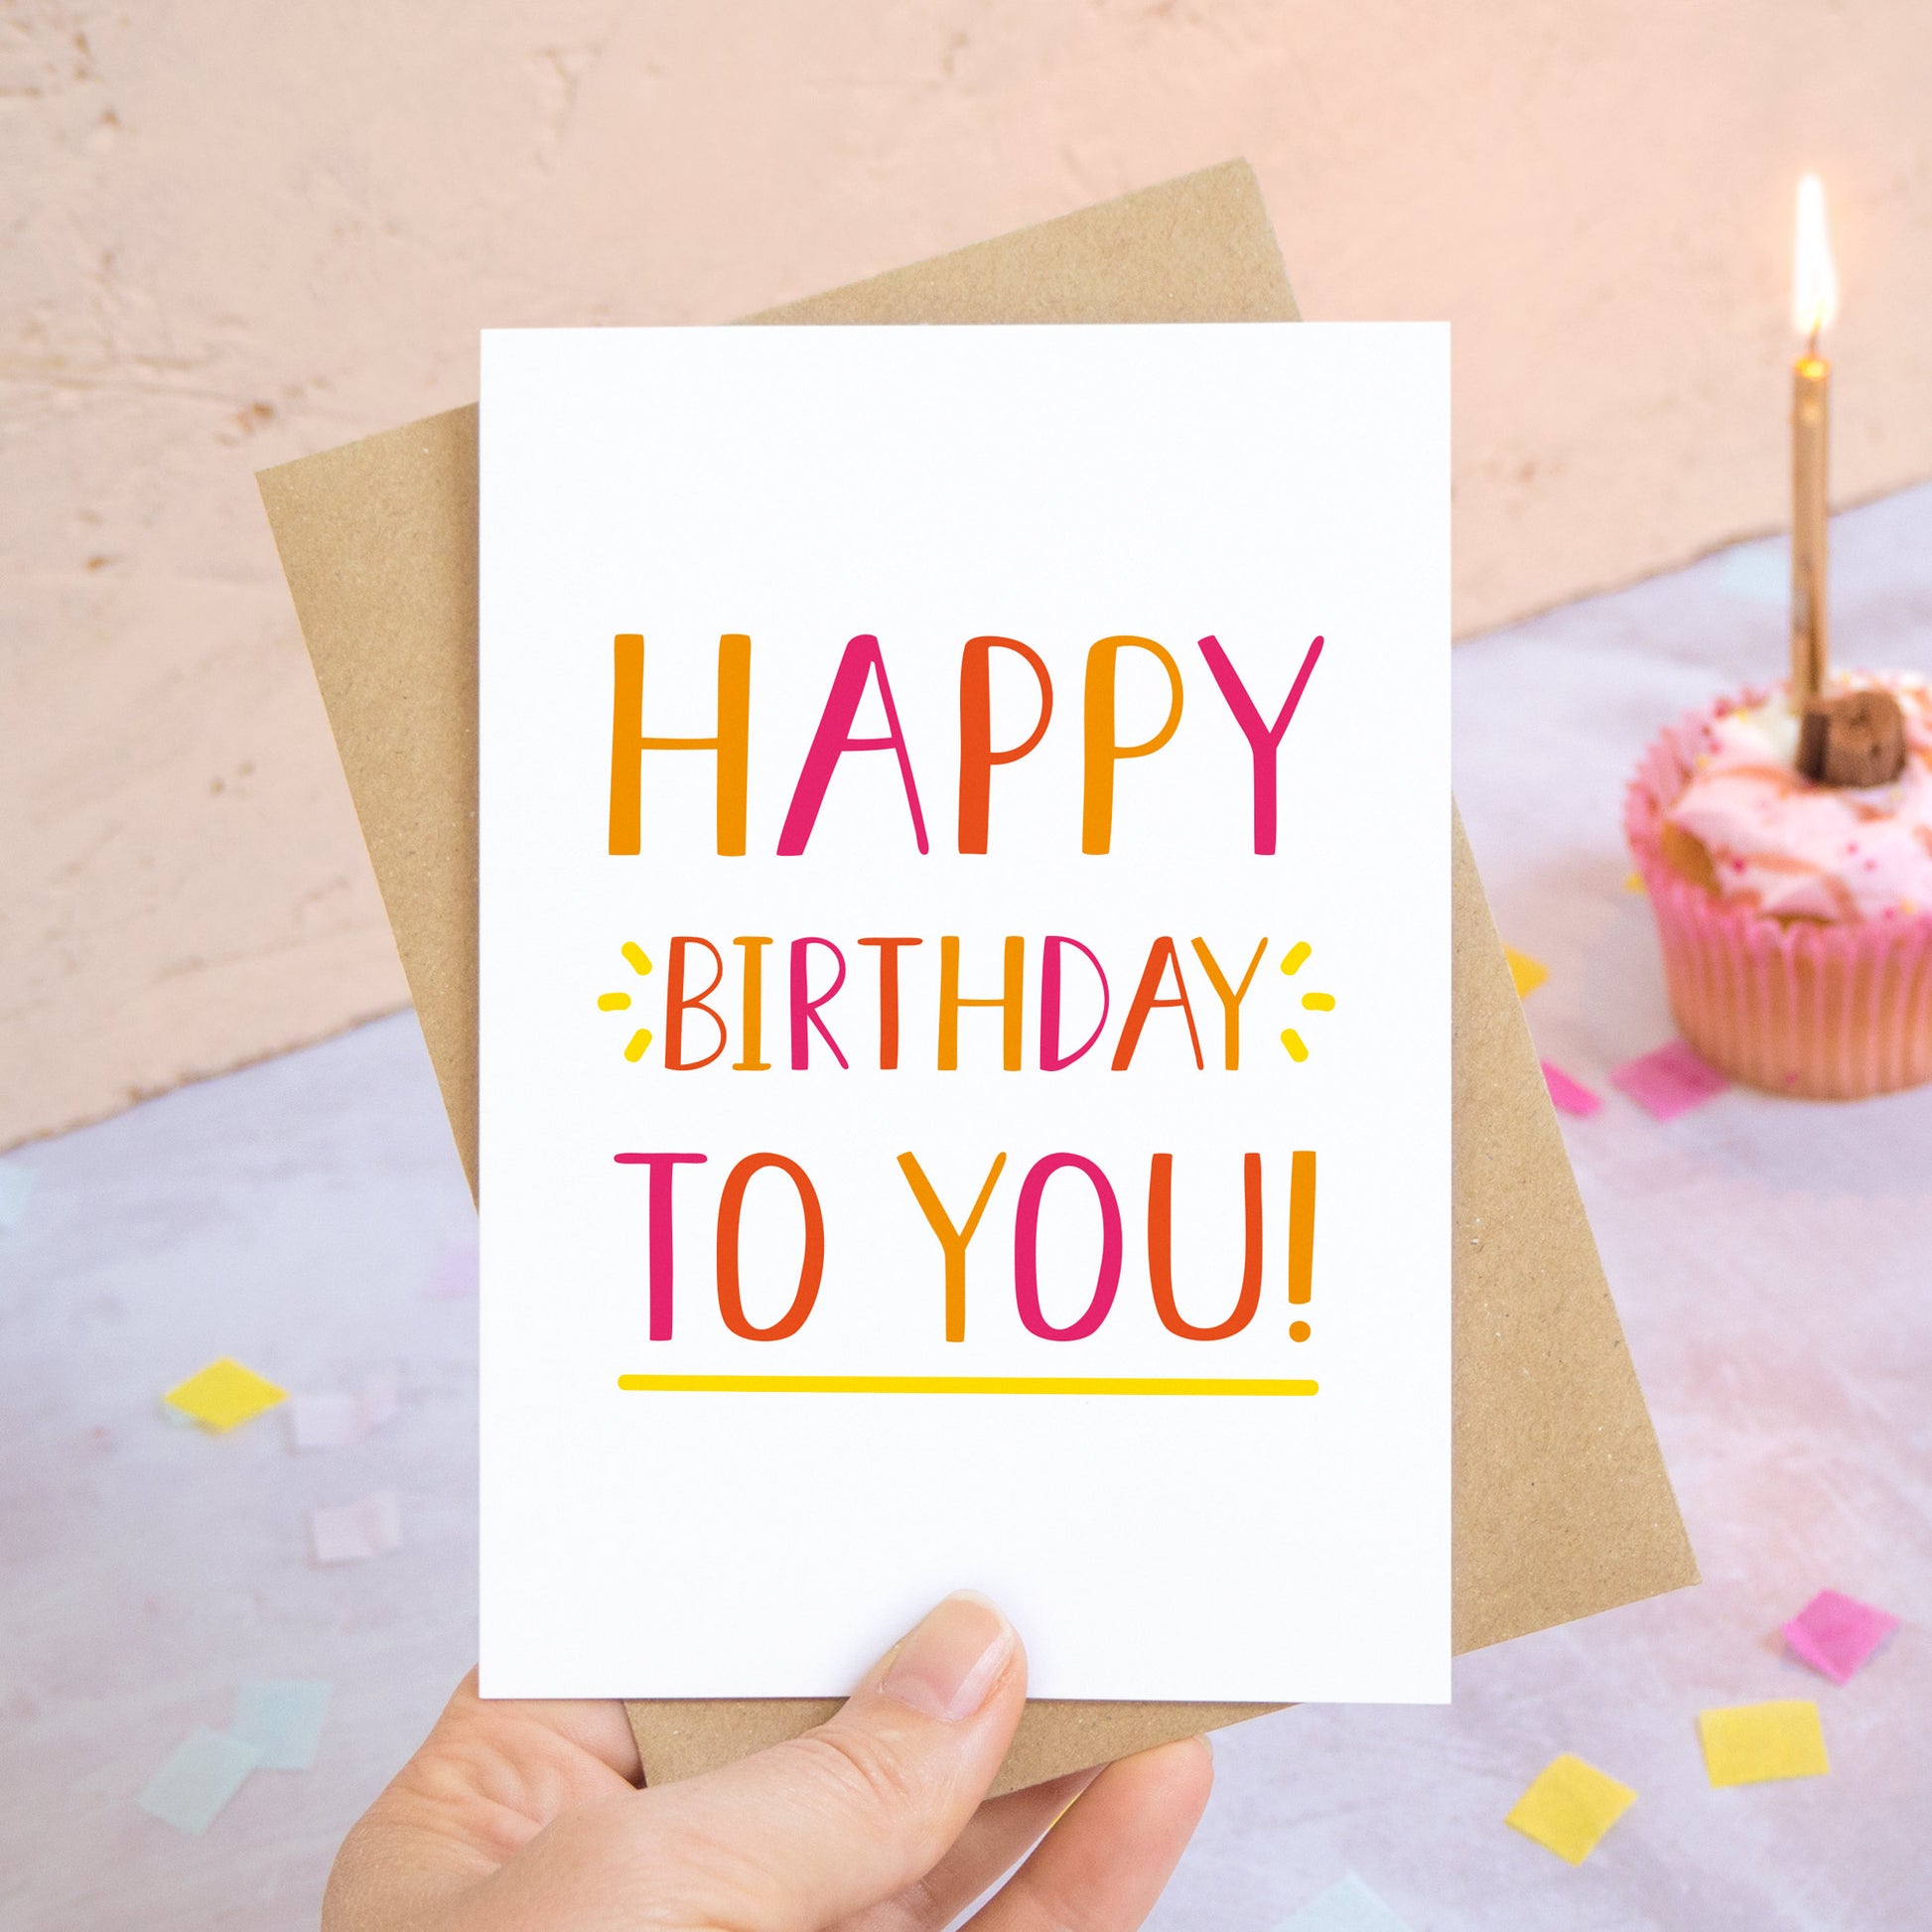 A happy birthday to you card in orange photographed over a grey and peach background with pieces of confetti and a pink cupcake with a single candle.